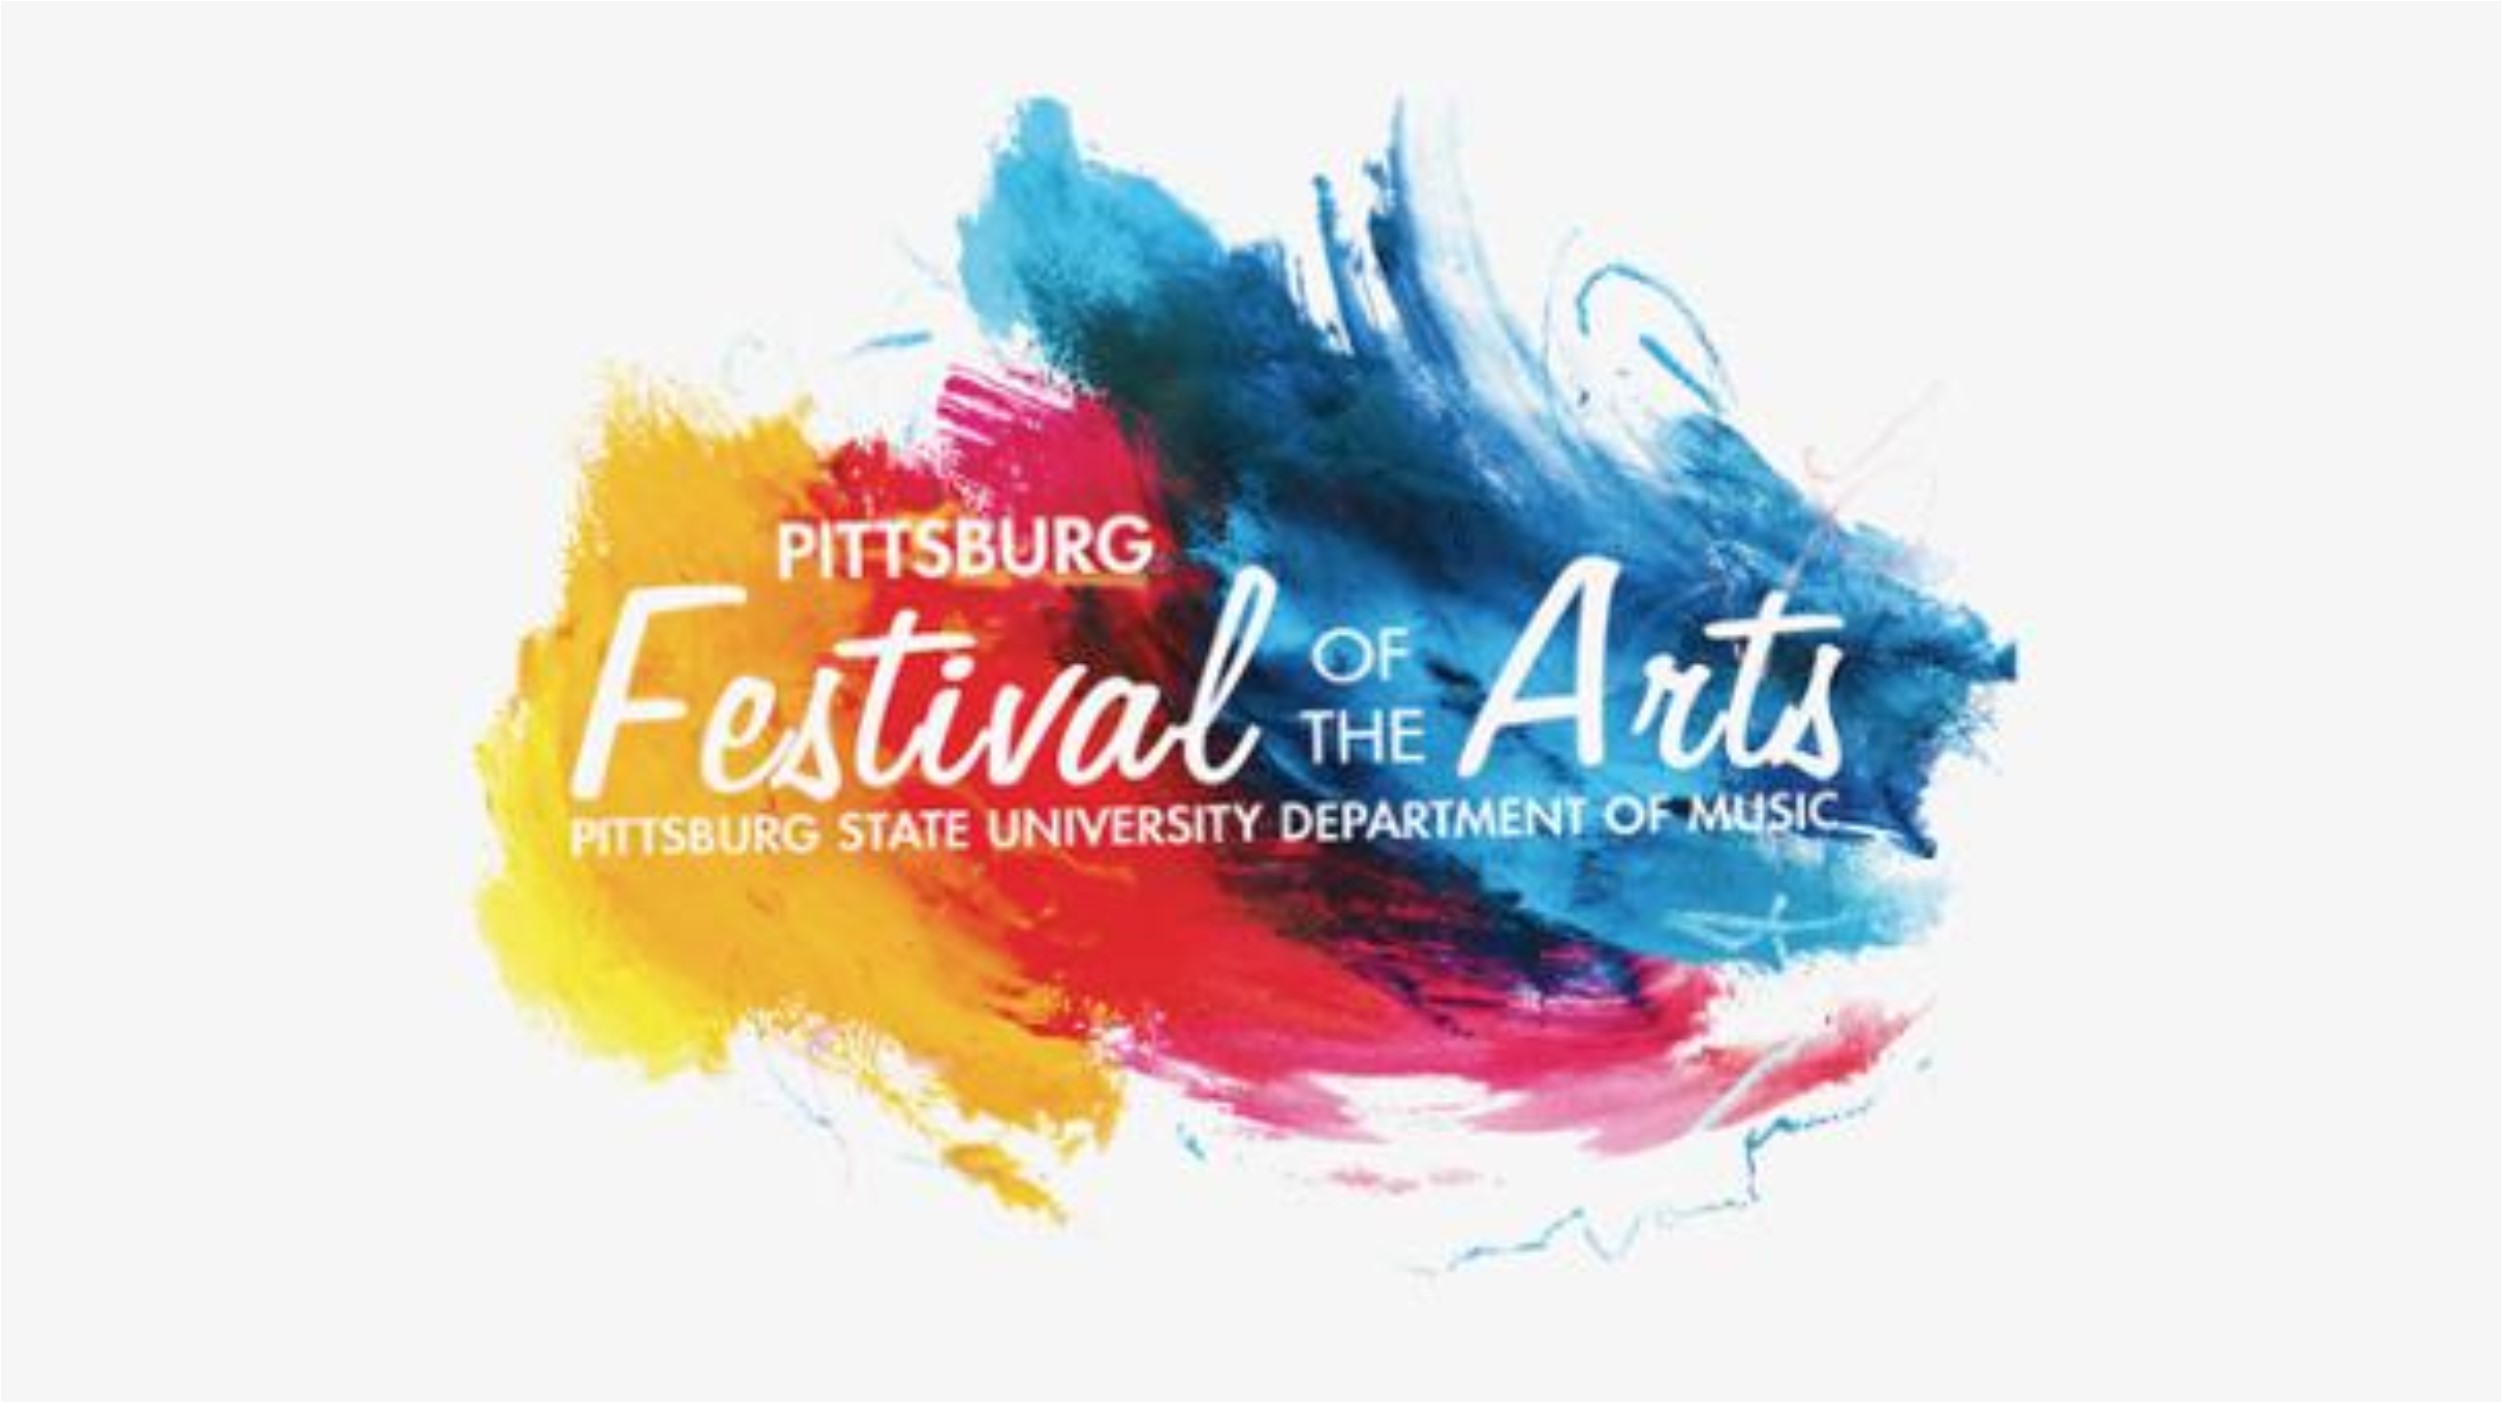 Yellow, pink, and blue brushstroke background with text "Pittsburg Festival of the Arts Pittsburg State University Department of Music"